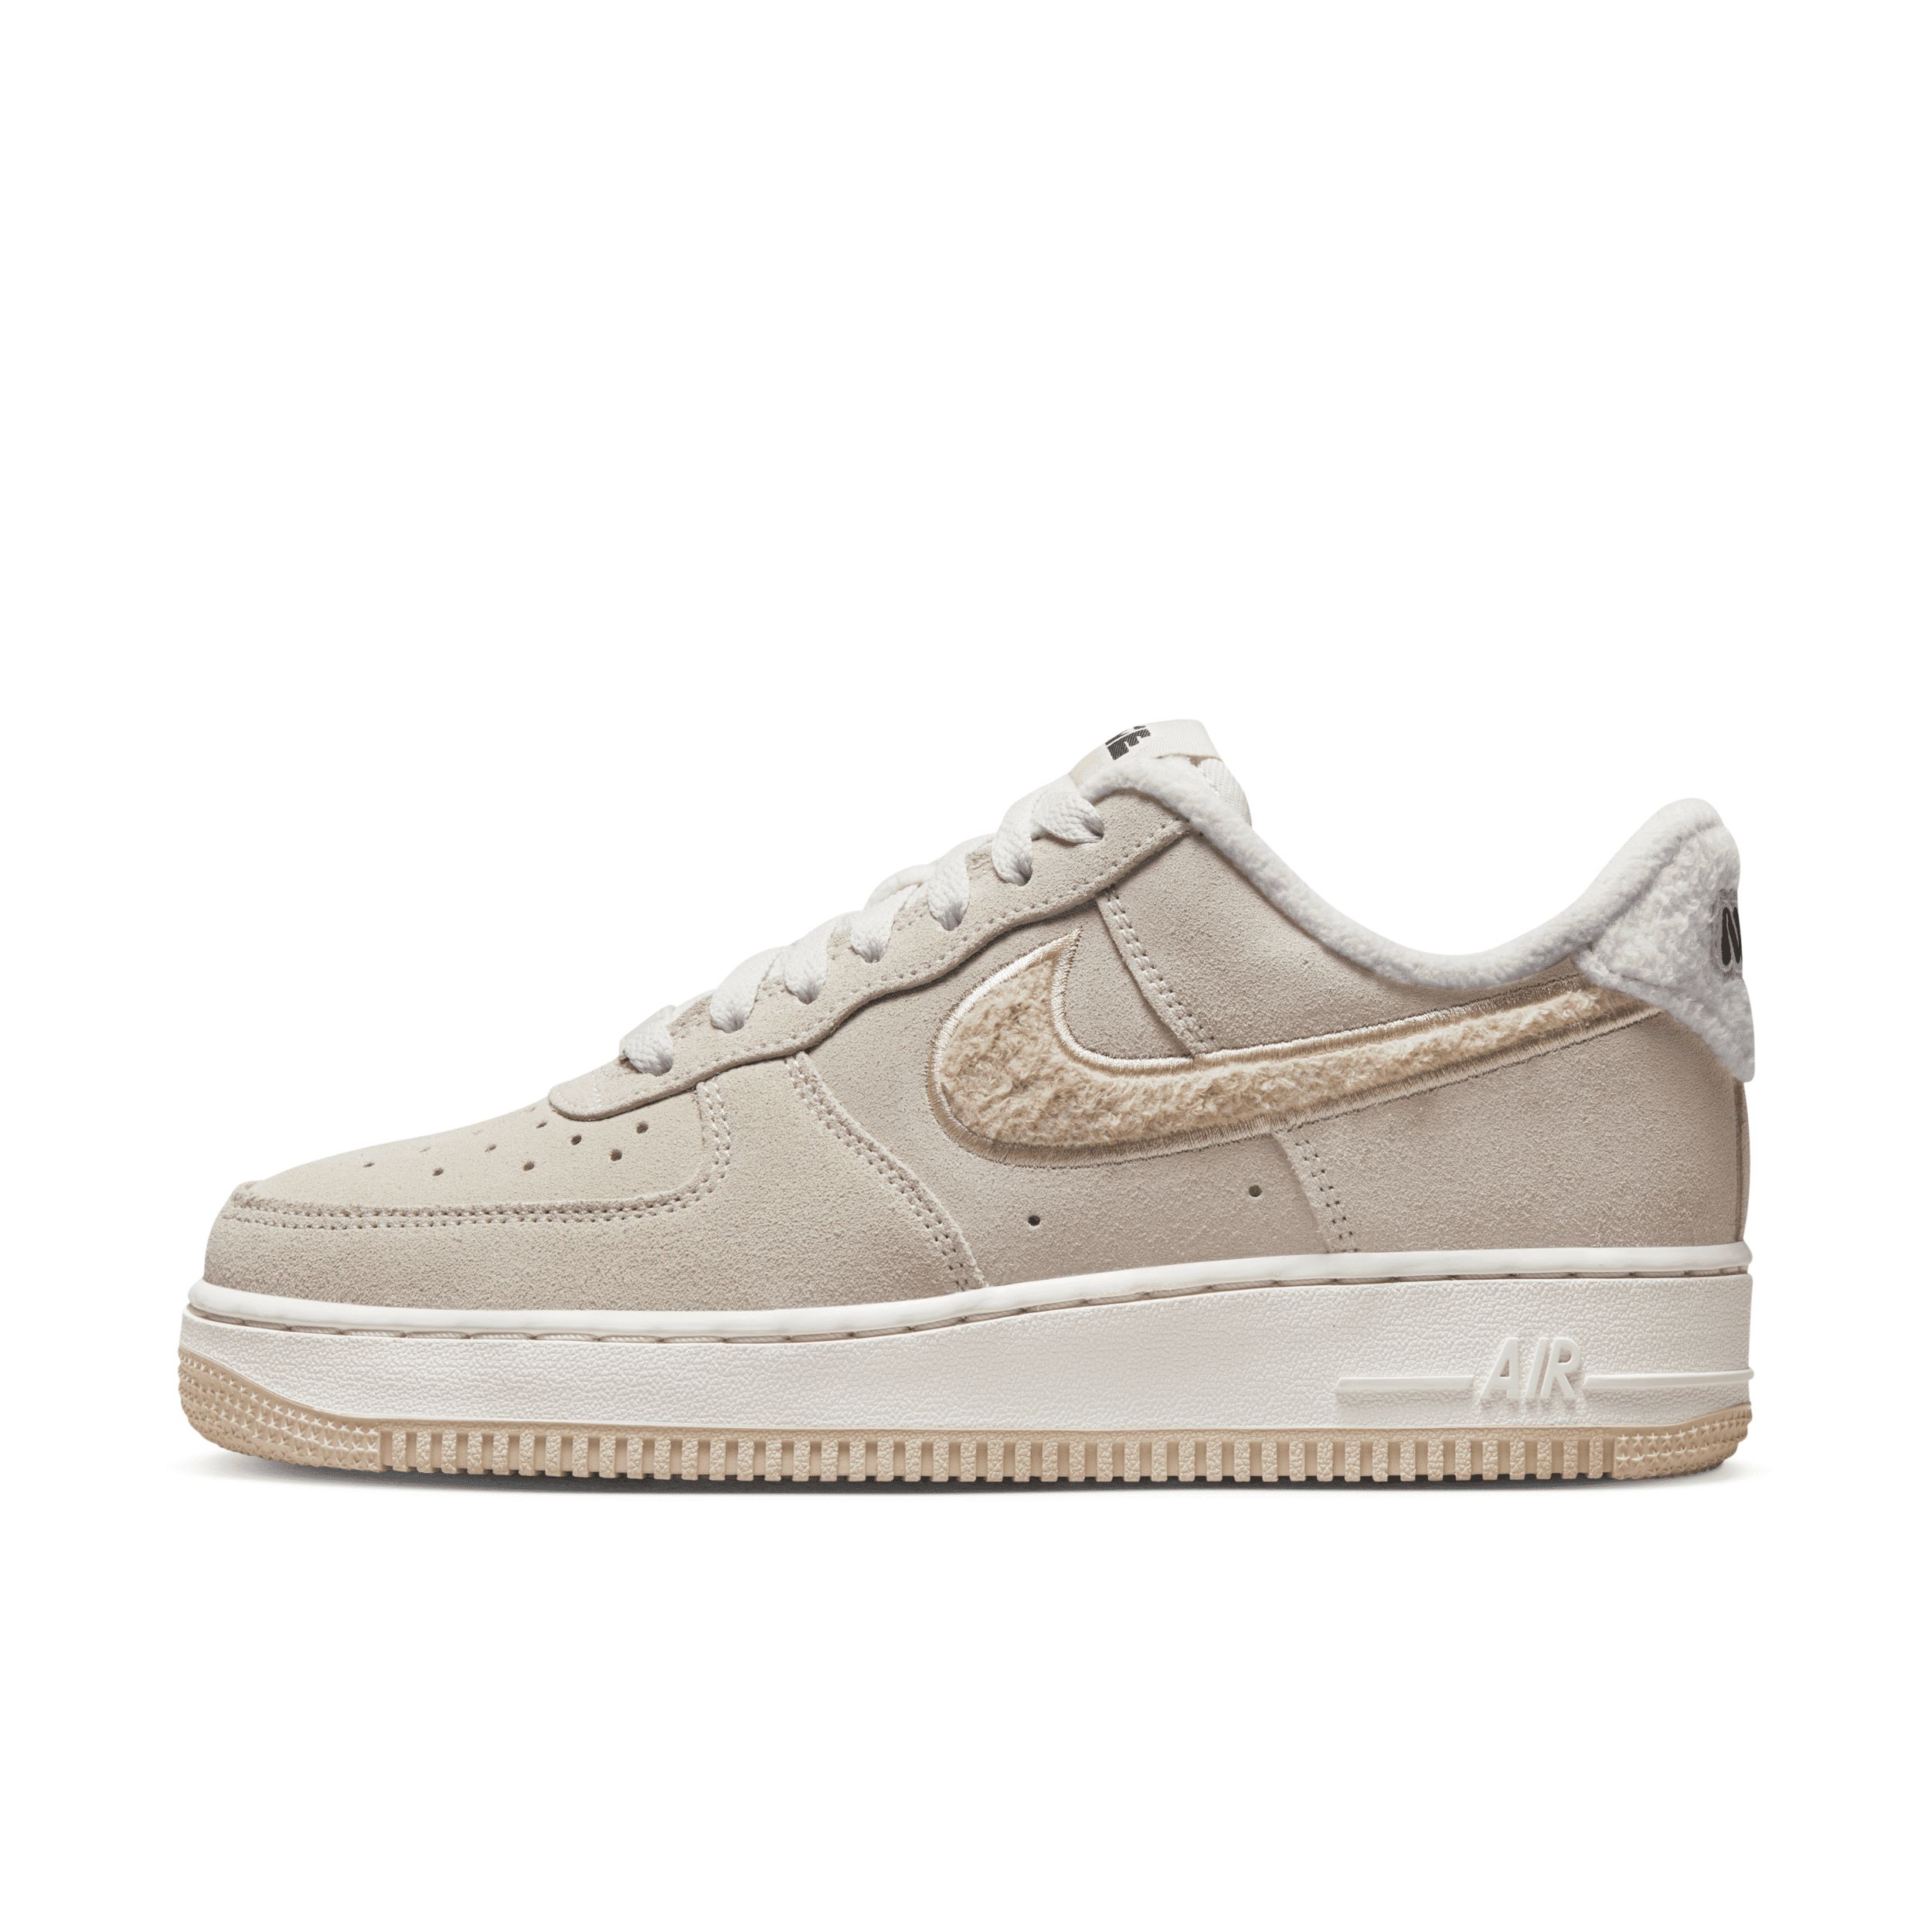 Nike Women's Air Force 1 '07 SE Shoes in Grey, Size: 7 | DQ7583-001 | Nike (US)